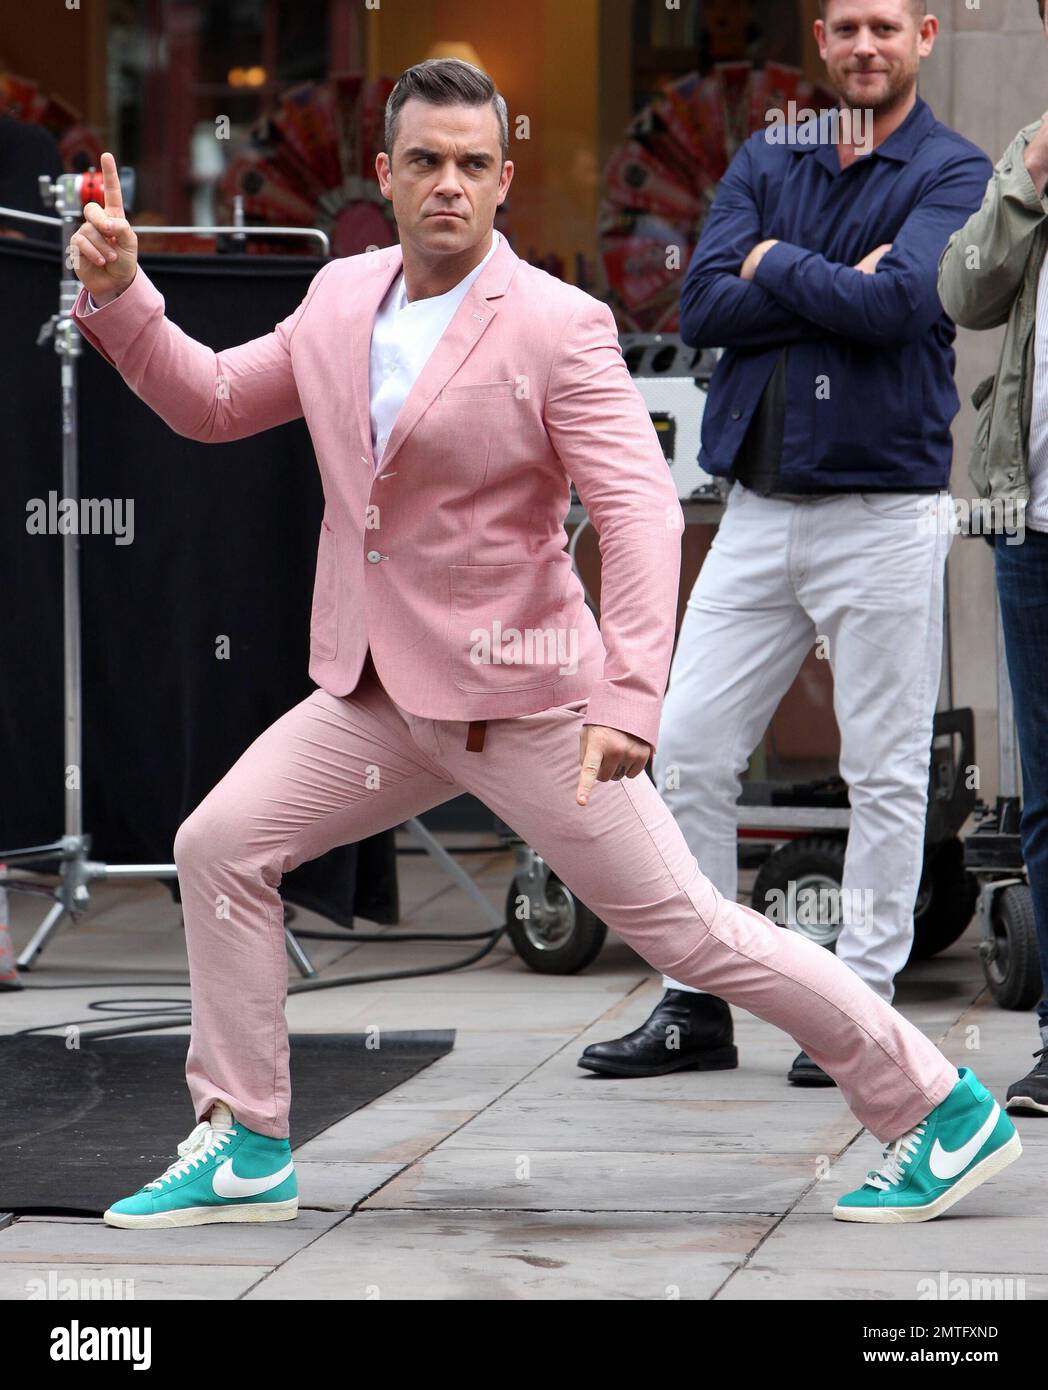 Wearing a pink suit with baby blue sneakers, Robbie Williams and star Kaya Scodelario were spotted on set filming scenes for his new music video in London. According to